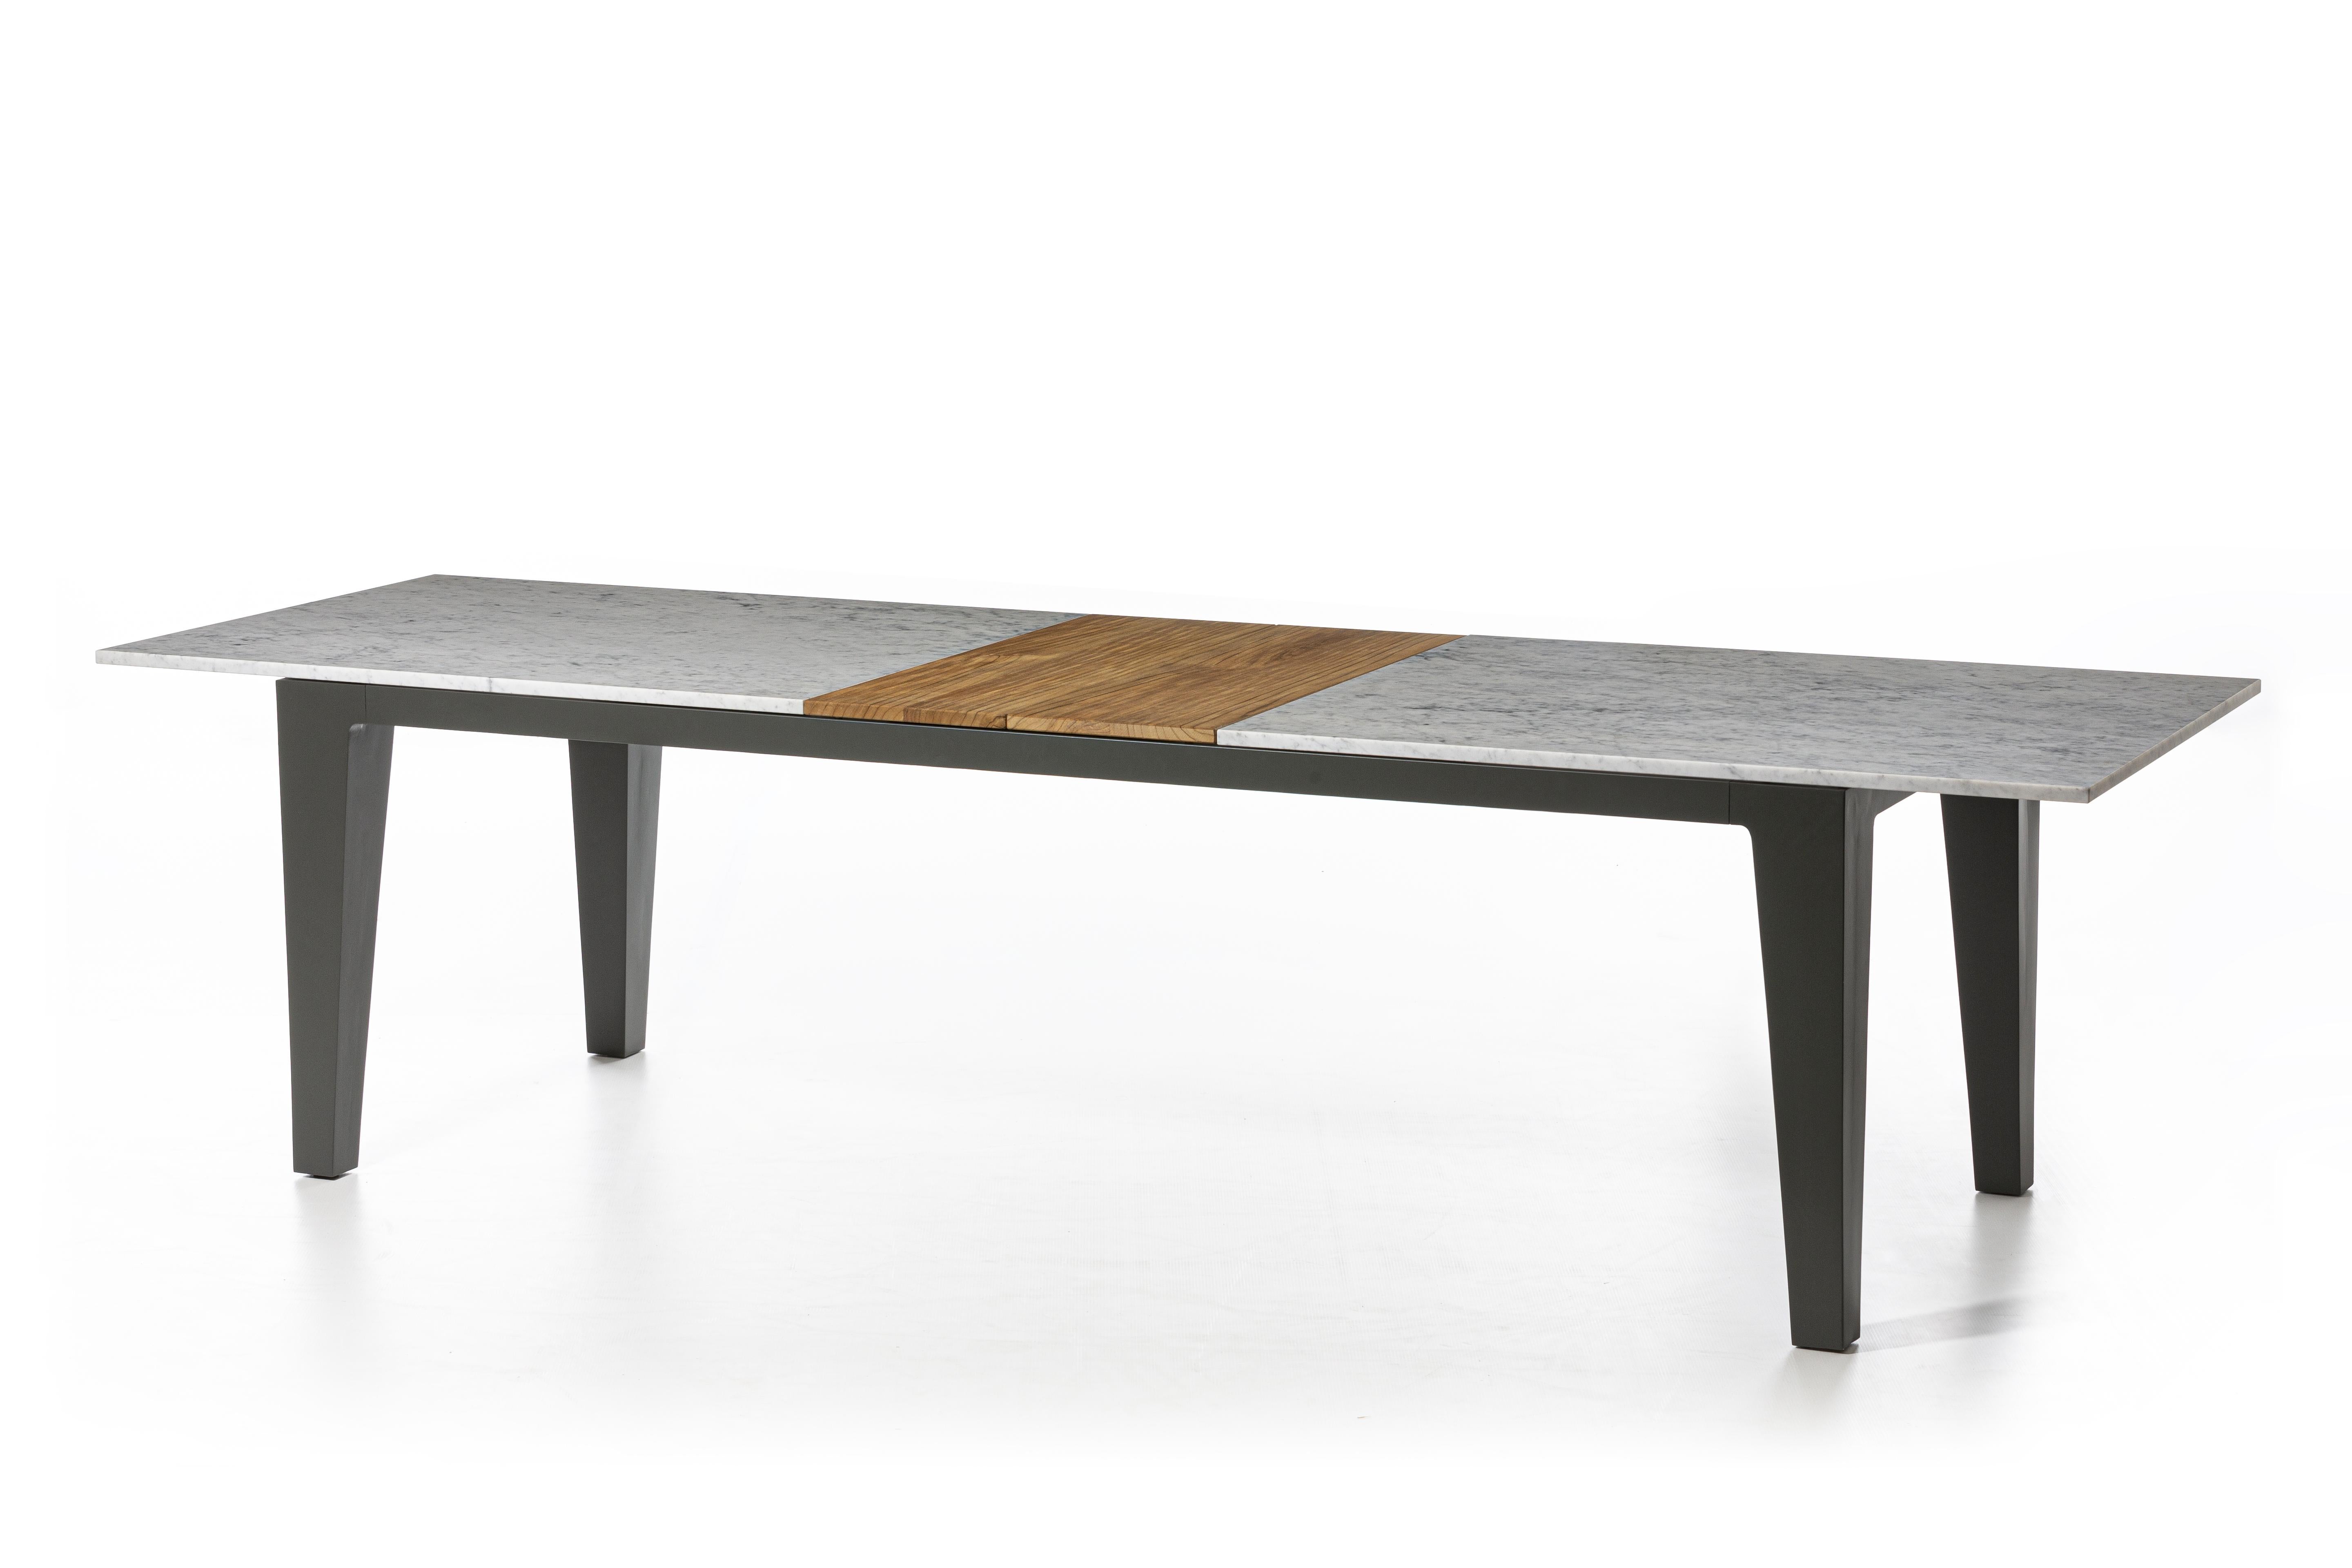 Family of tables born from the union of different materials, Inout 143/144 have a rectangular top and are available in various sizes. Formed of a structure in matt white, grey or sage painted aluminium, they have the top available in different